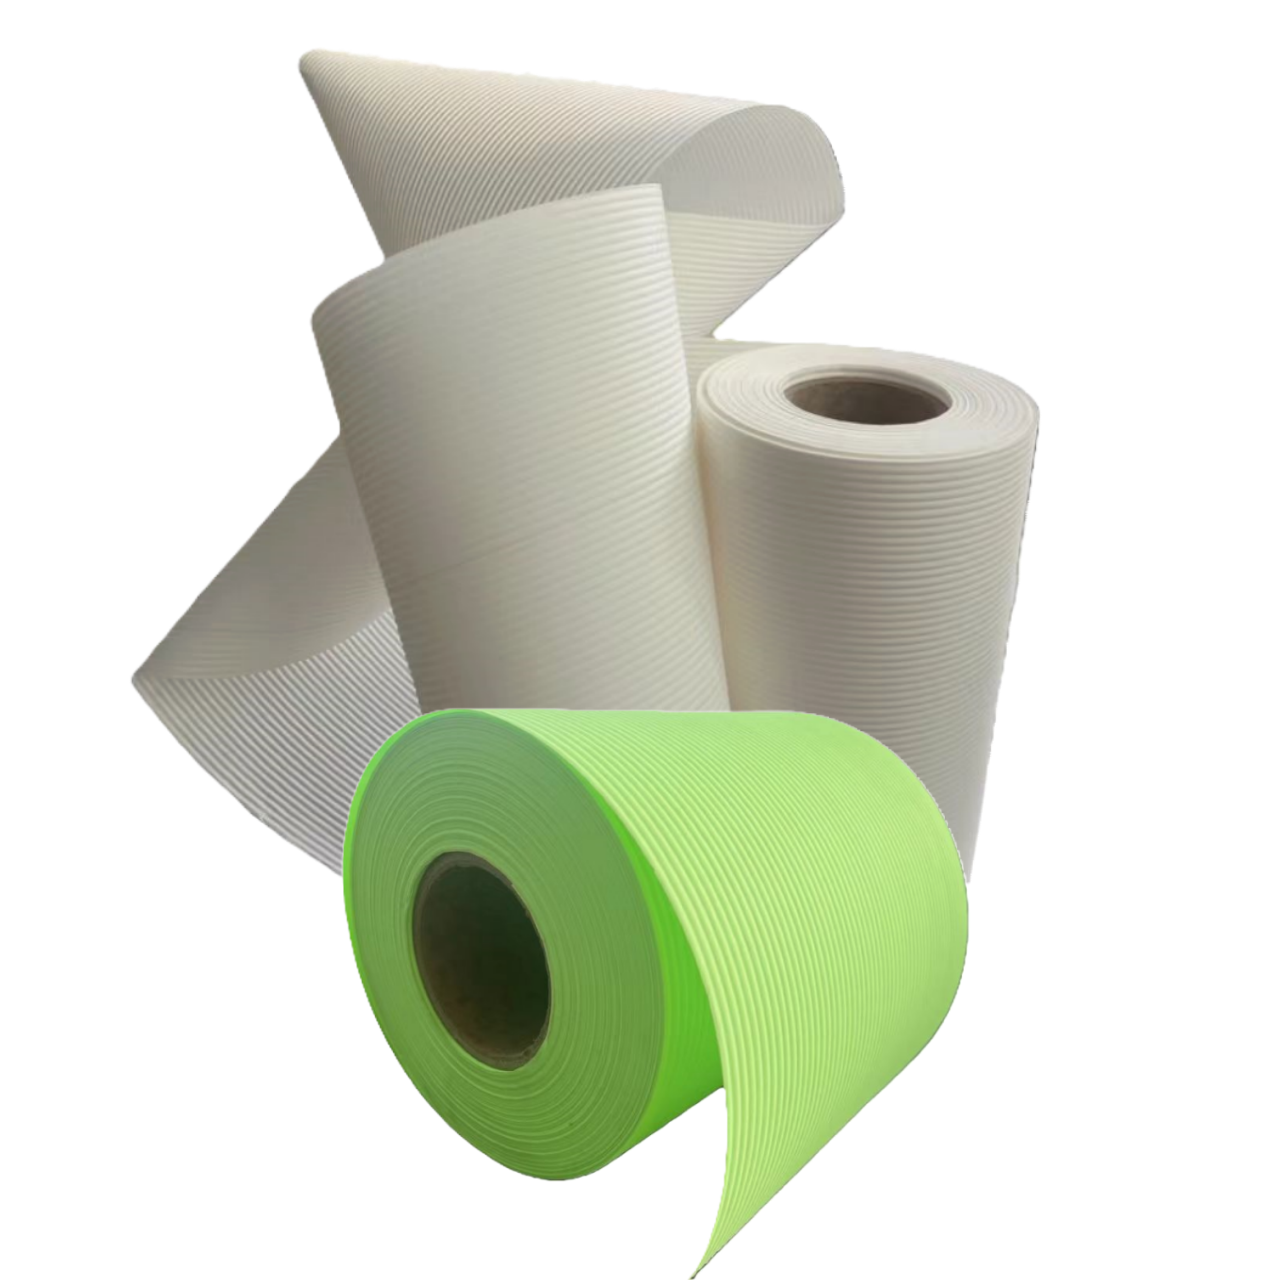 High quality air filter paper
